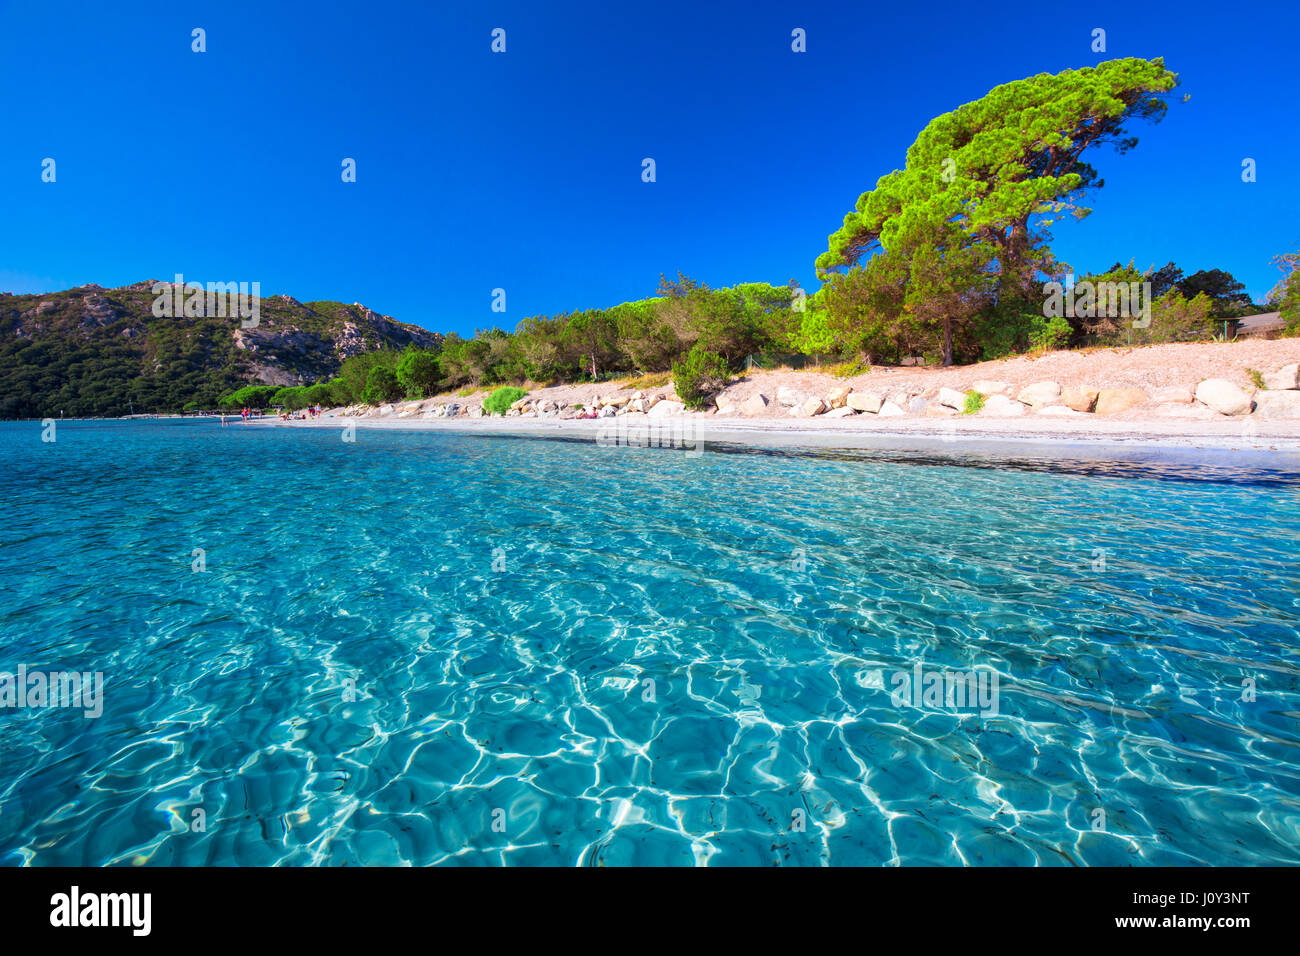 Santa Giulia sandy beach with pine trees and azure clear water, Corsica, France, Europe Stock Photo